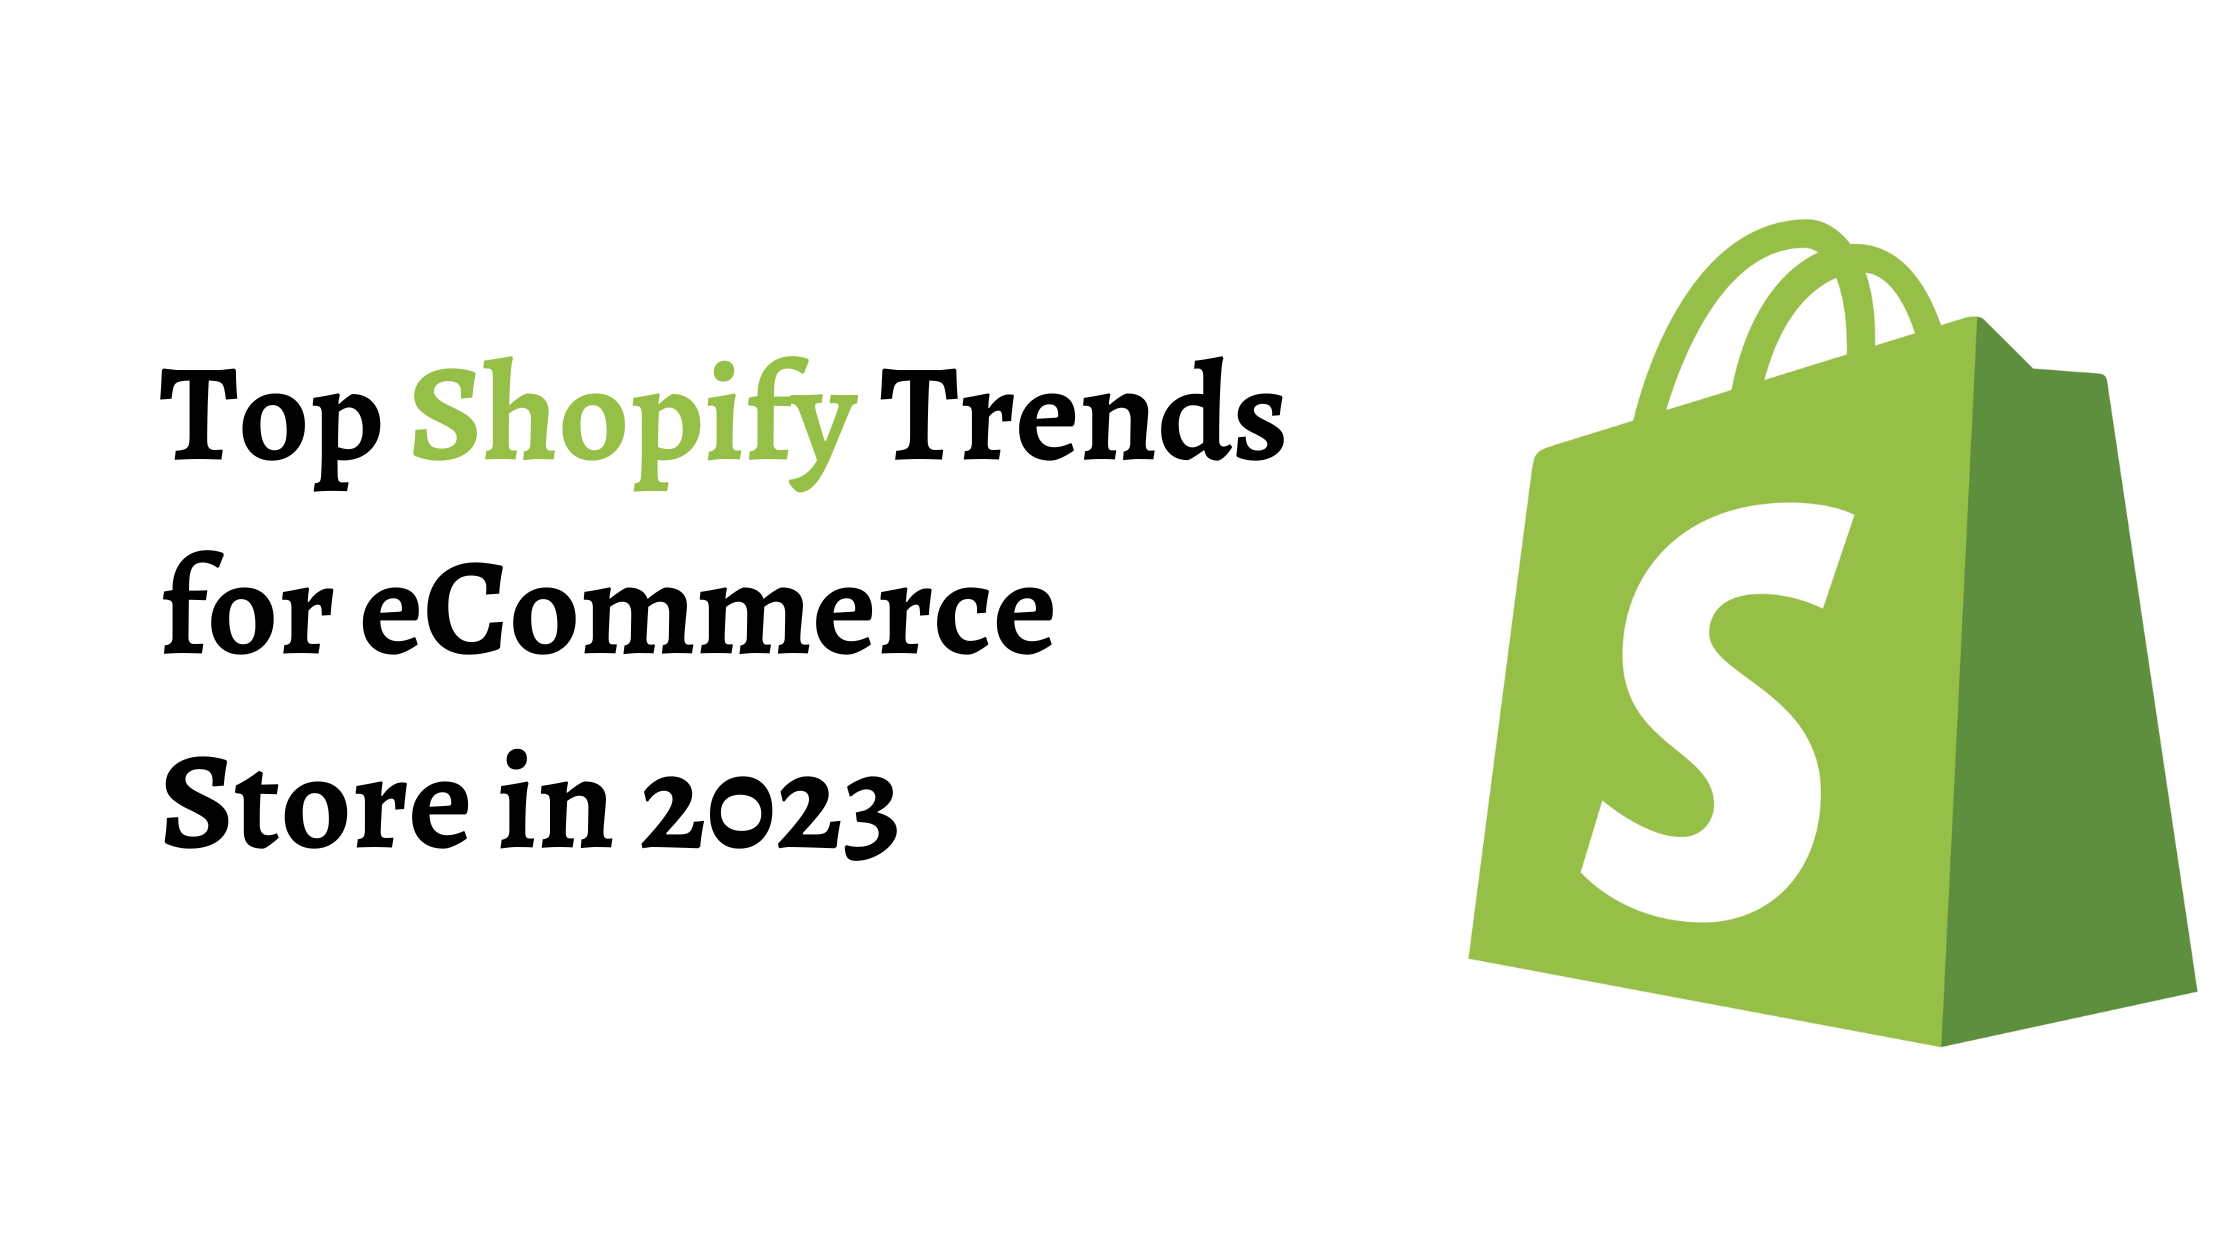 public/uploads/2023/06/Top-Shopify-Trends-for-eCommerce-Store-in-2023.png